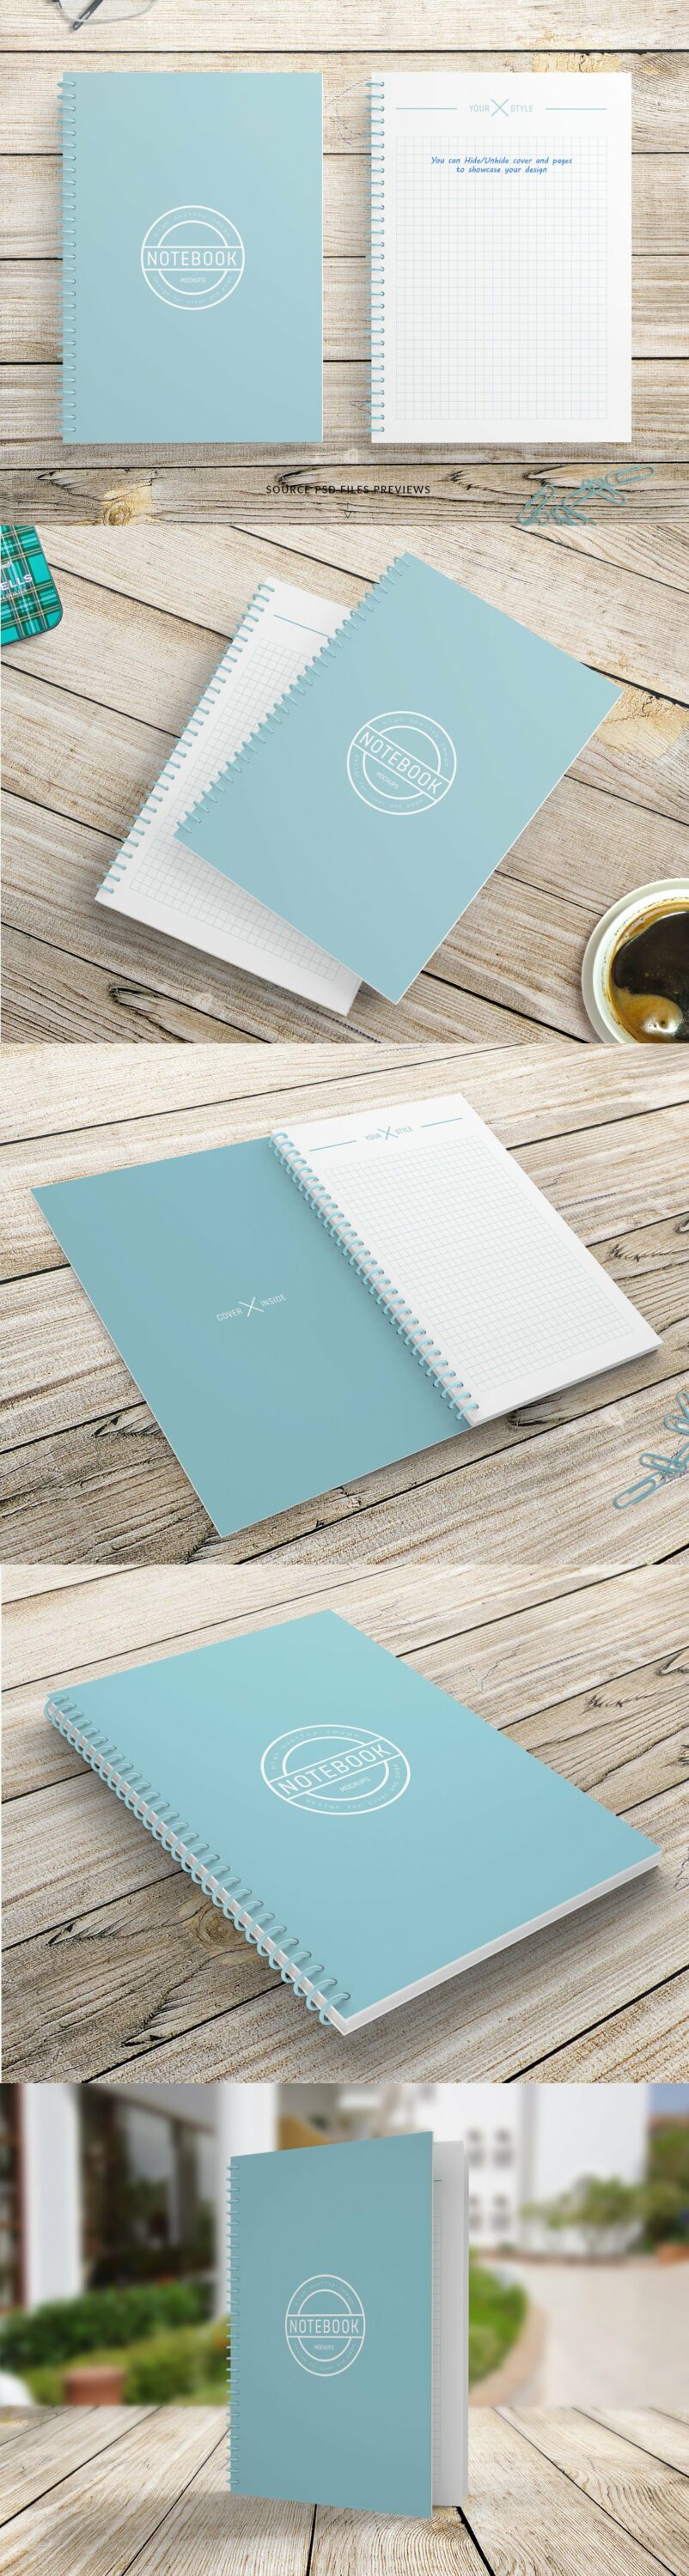 A selection of images of a notebook with an enchanting design.